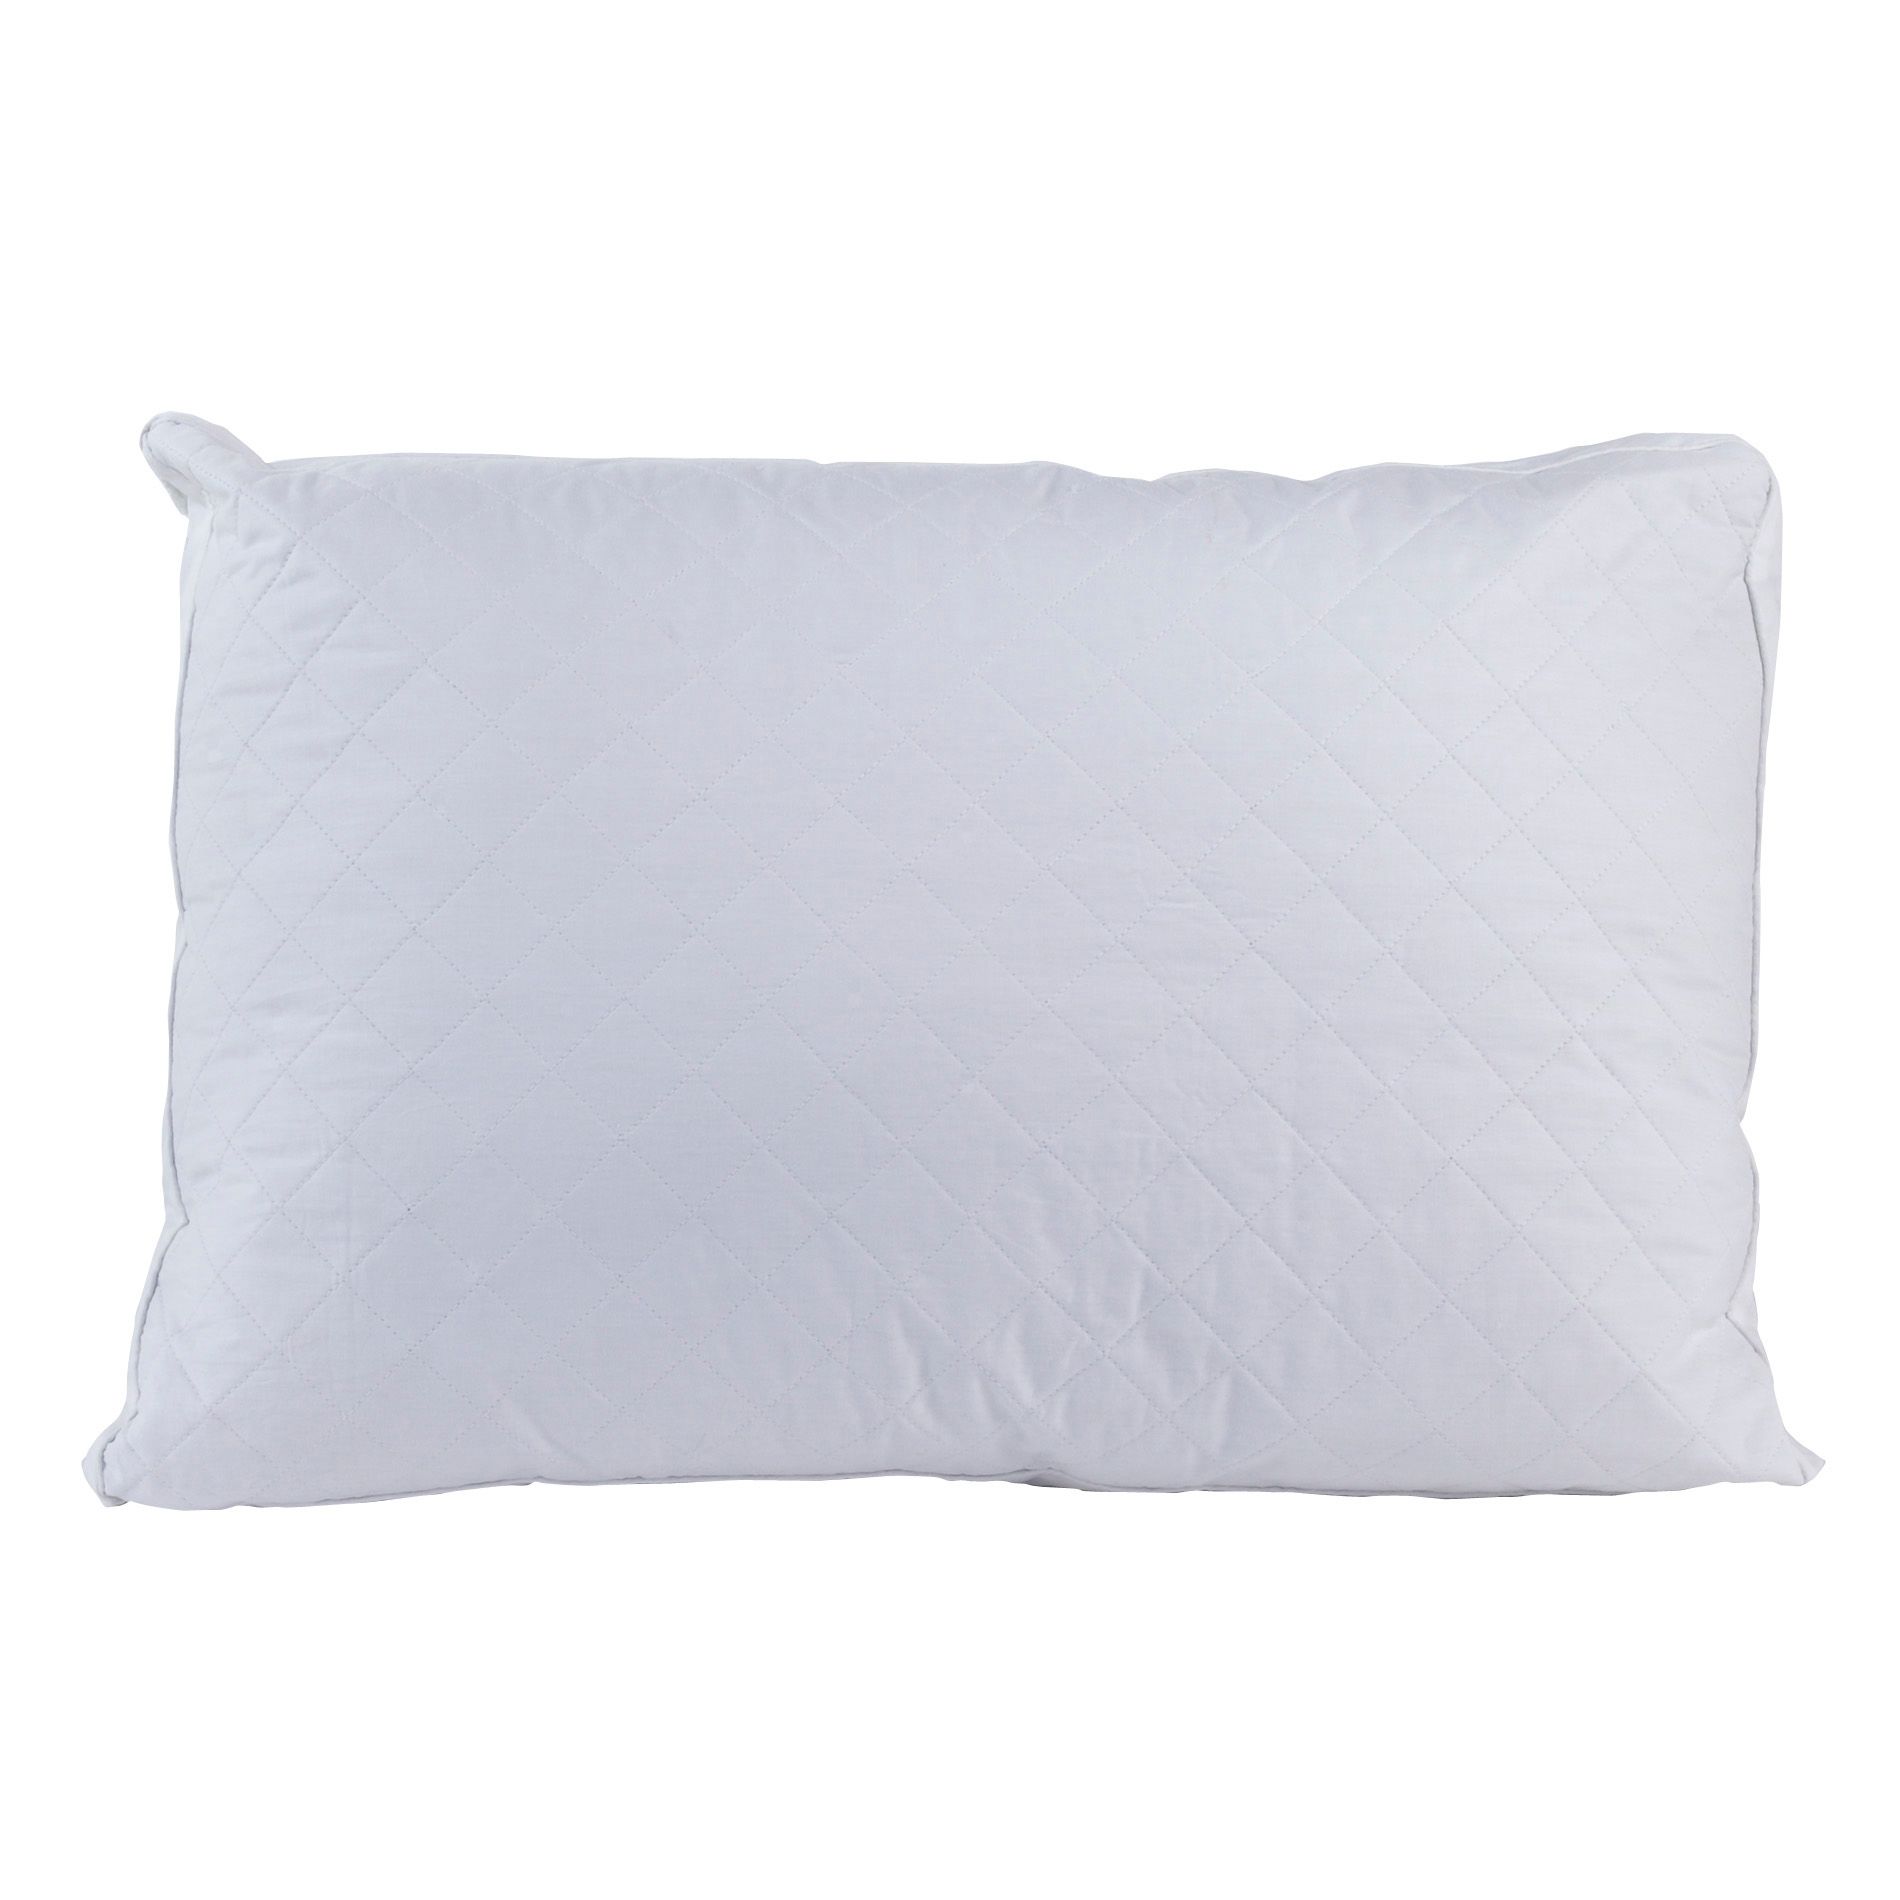 Cannon Quilted Standard/Queen Pillow